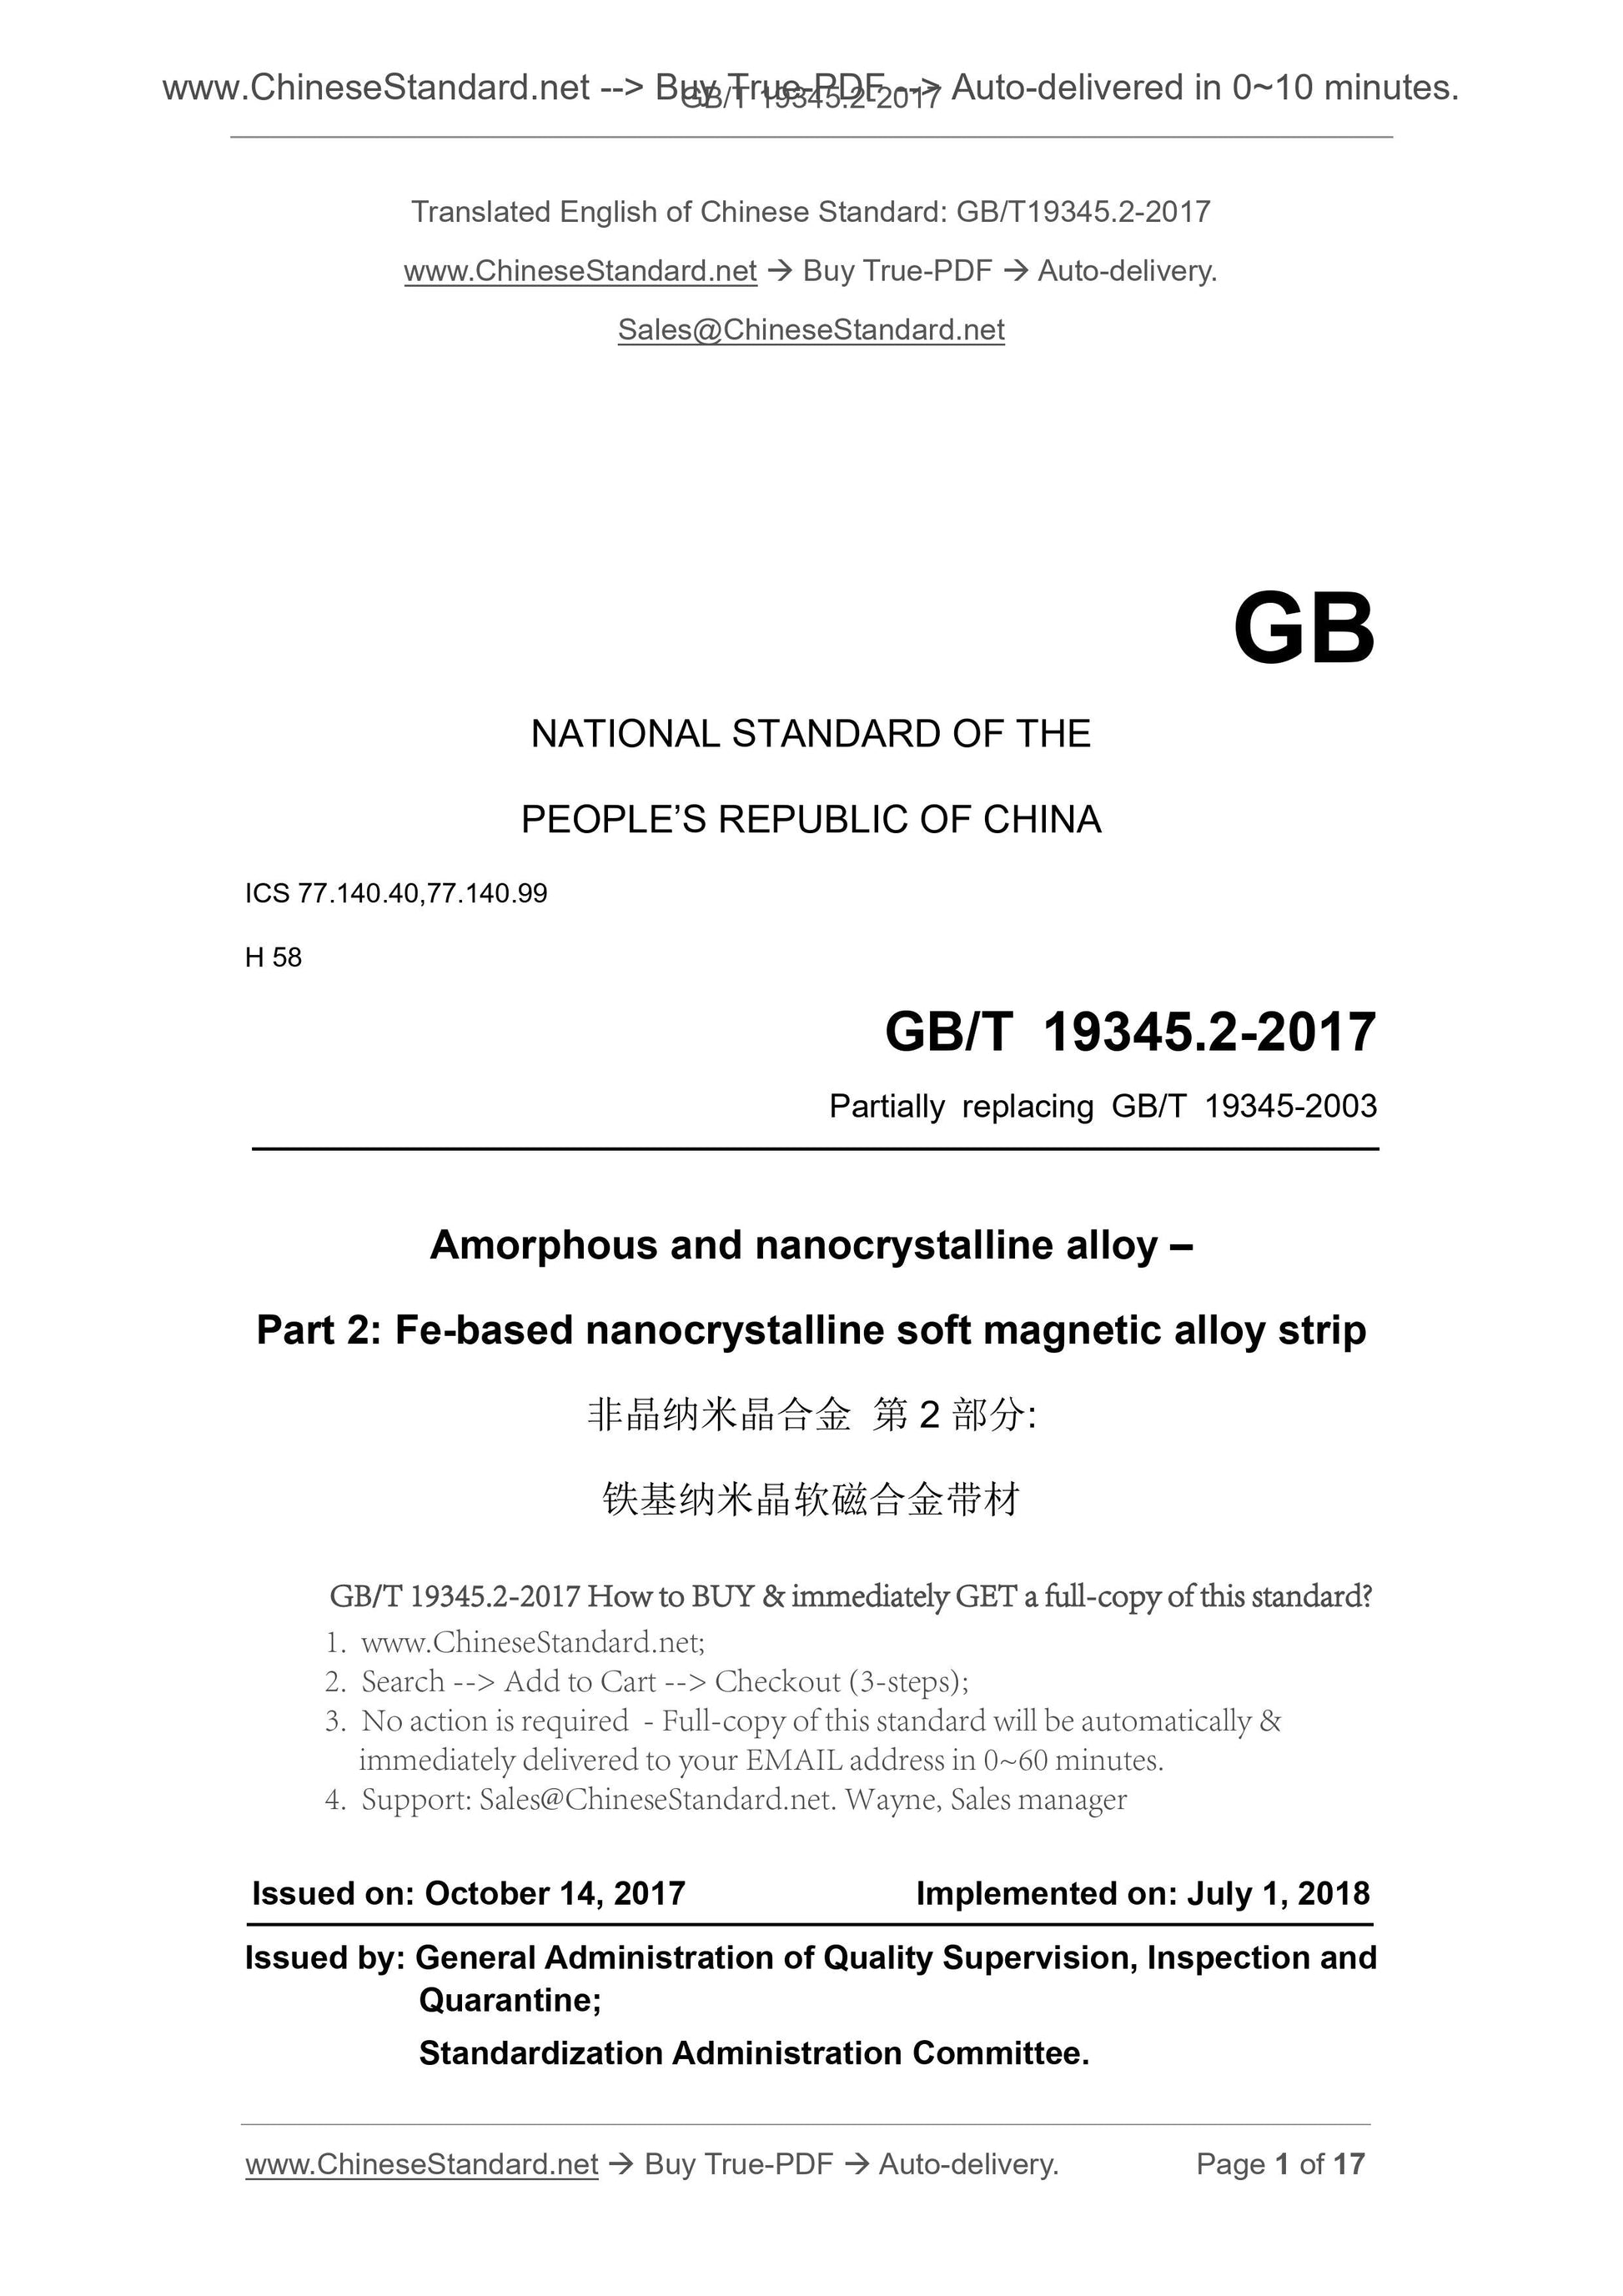 GB/T 19345.2-2017 Page 1